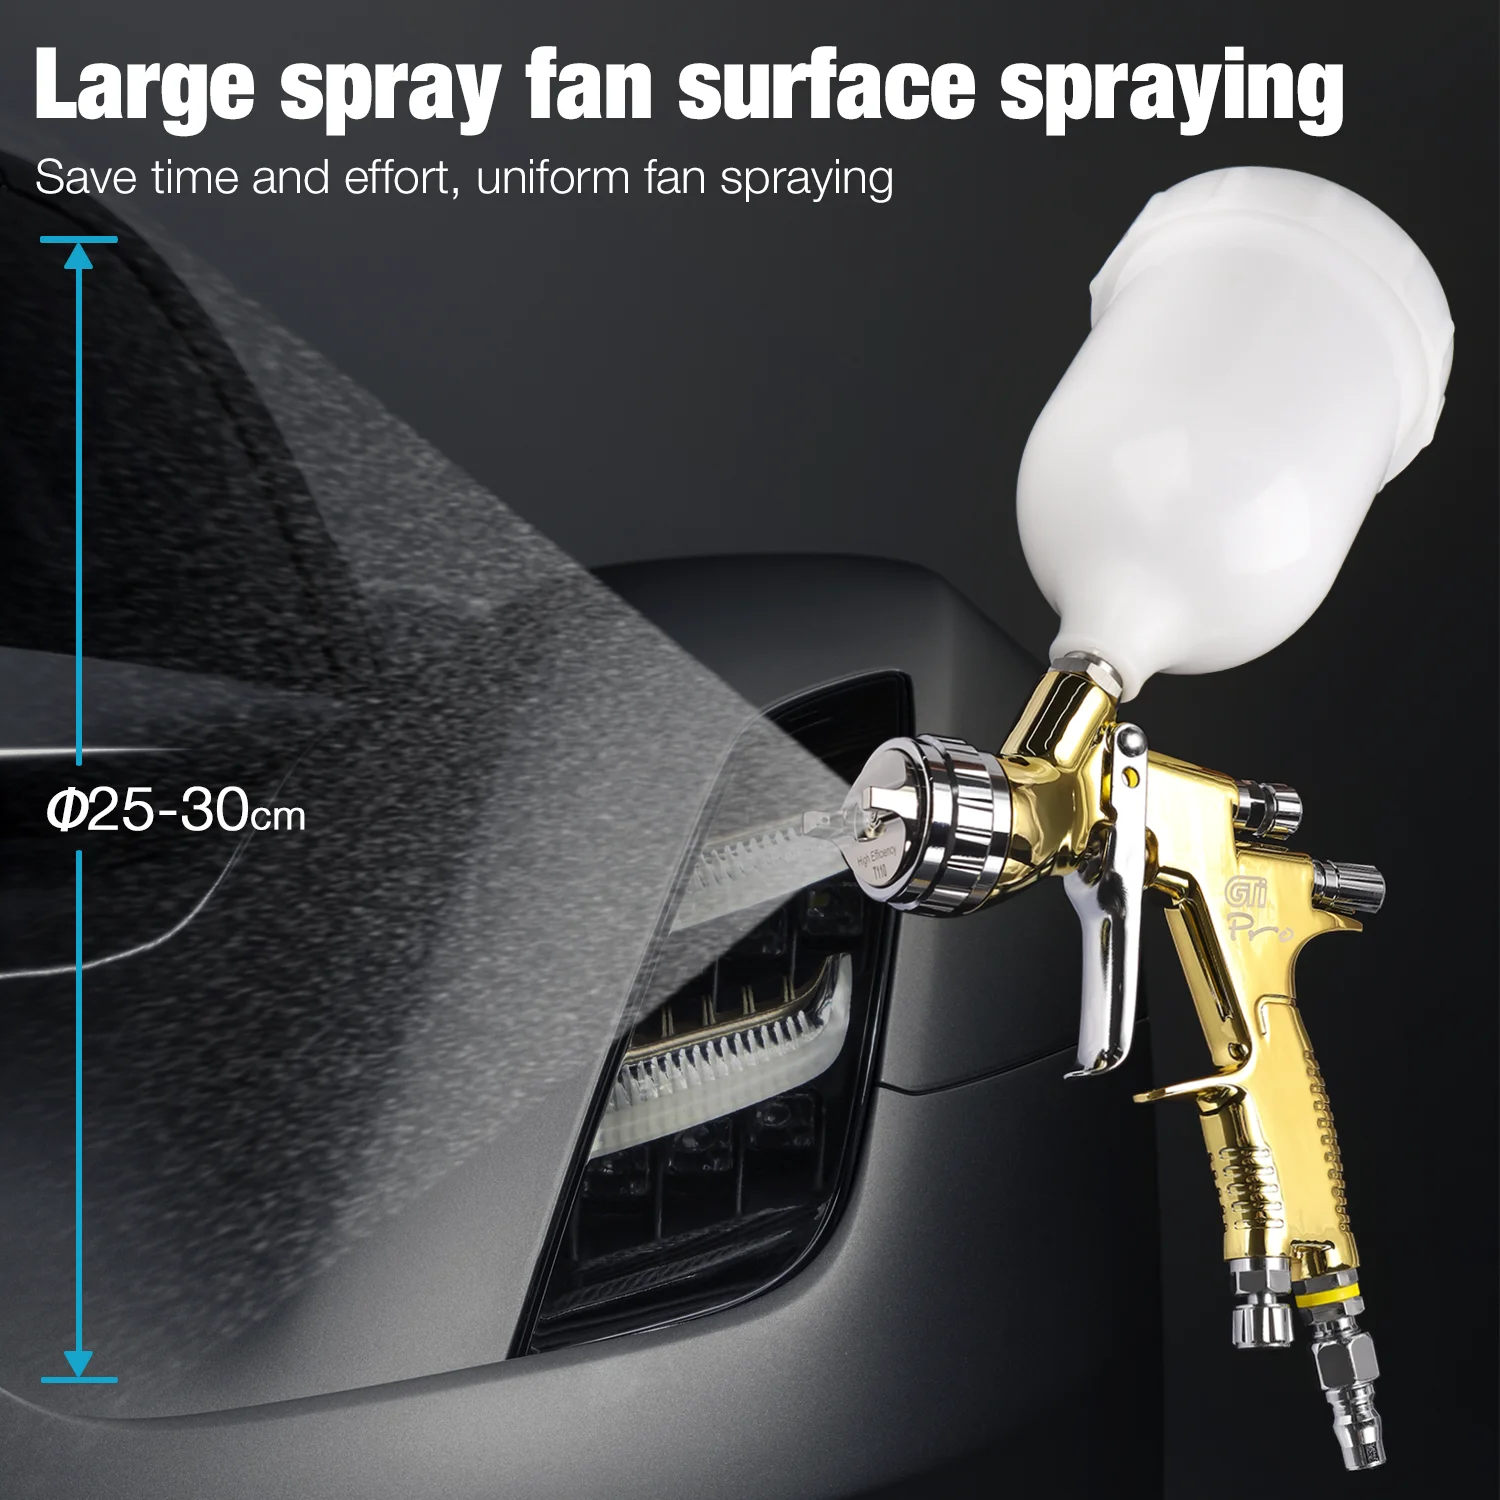 New High Quality Spray  GTI Pro 1.m Nozzle Painting  High Atomization Paint  Wat - £148.40 GBP